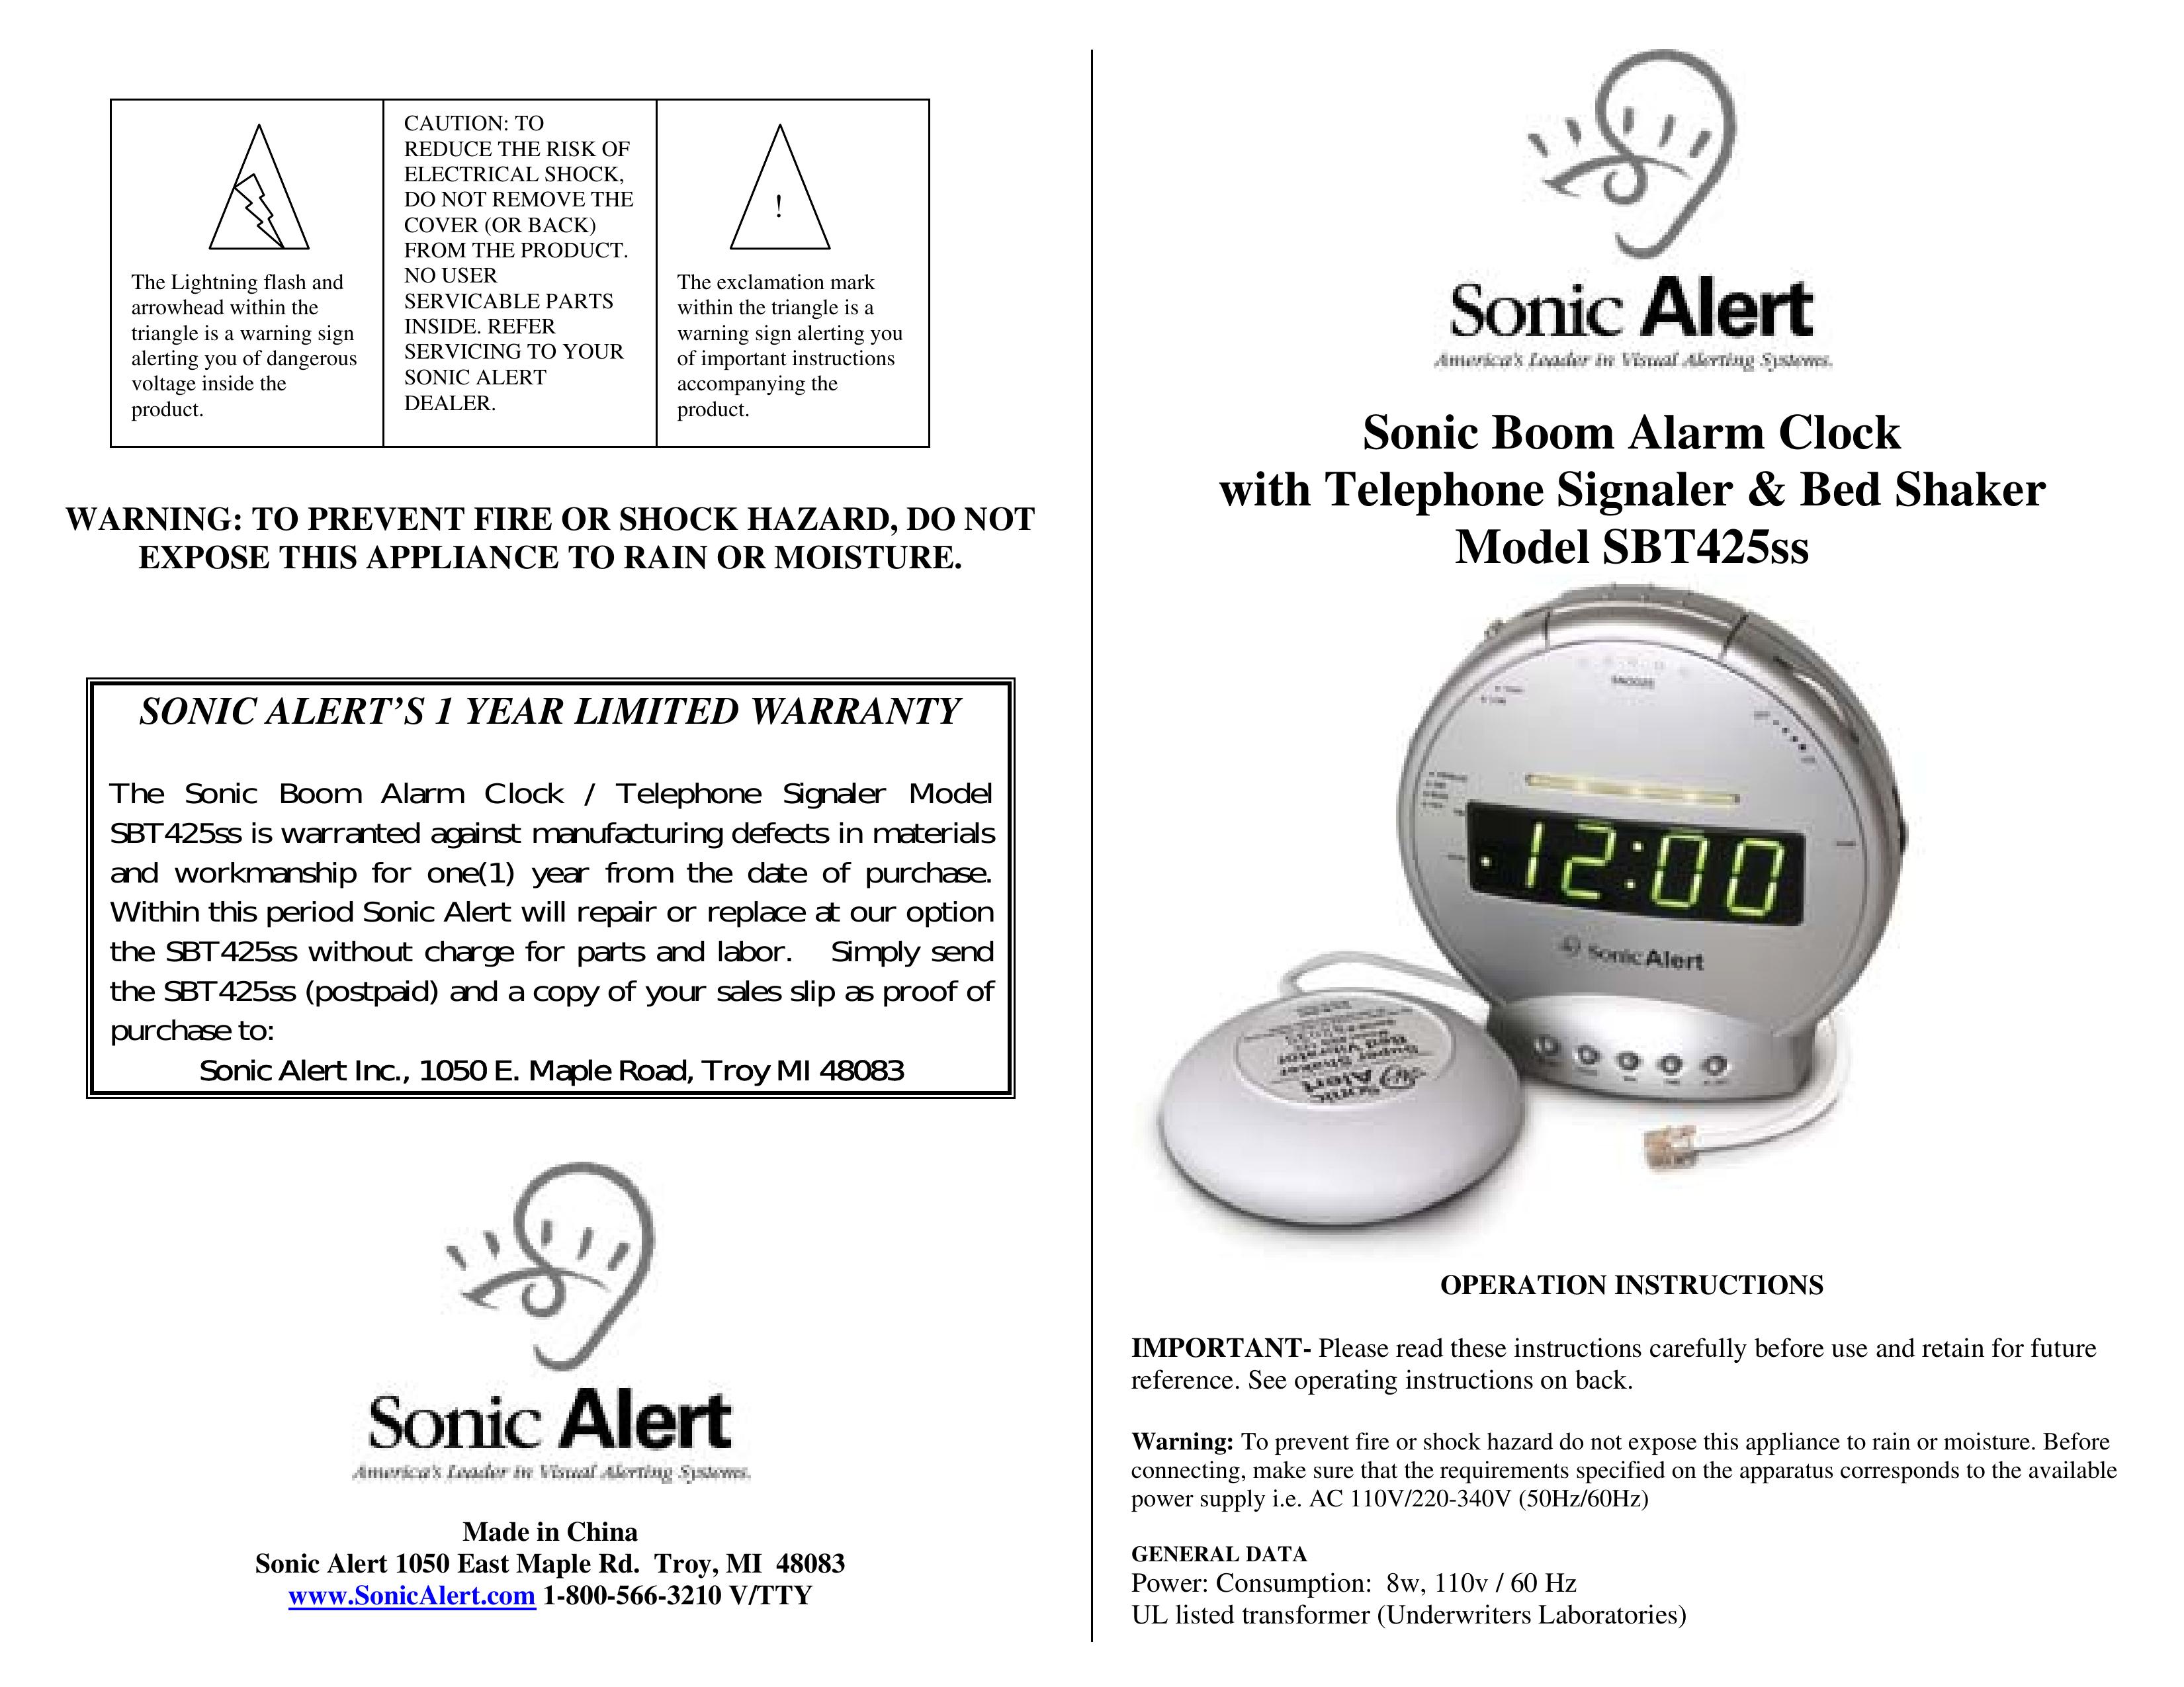 Sonic Alert SBT425SS Thermometer User Manual